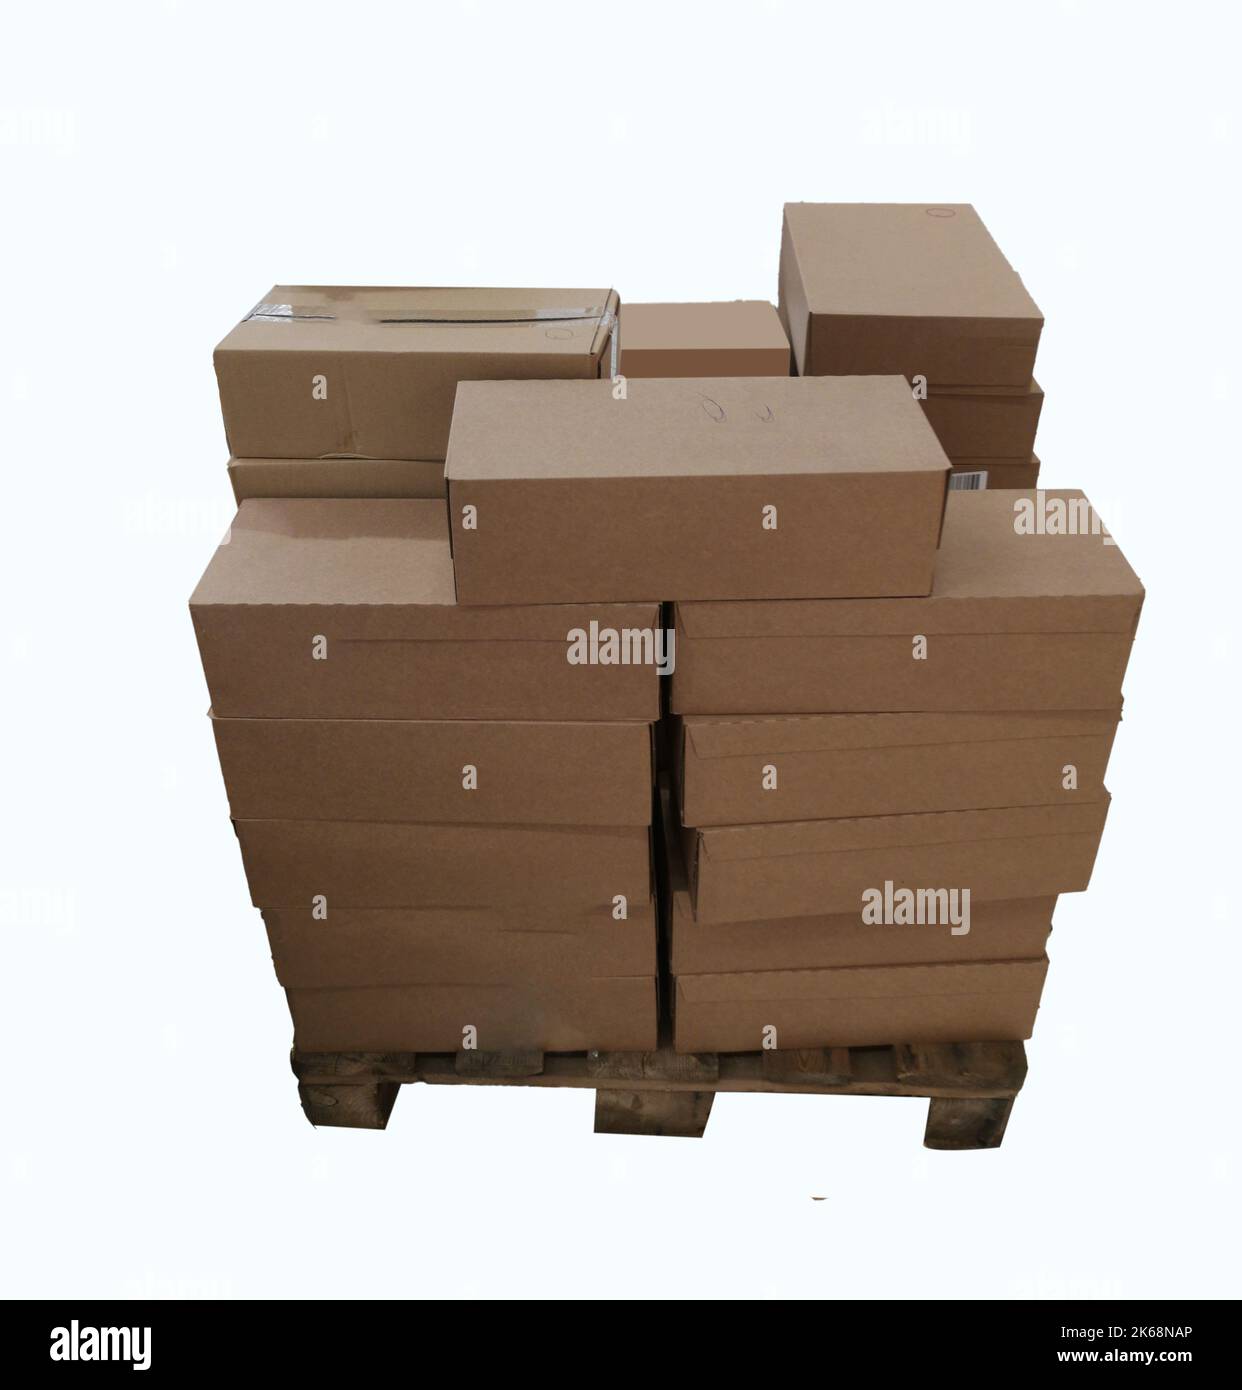 wooden pallet full of cardboard packages Stock Photo